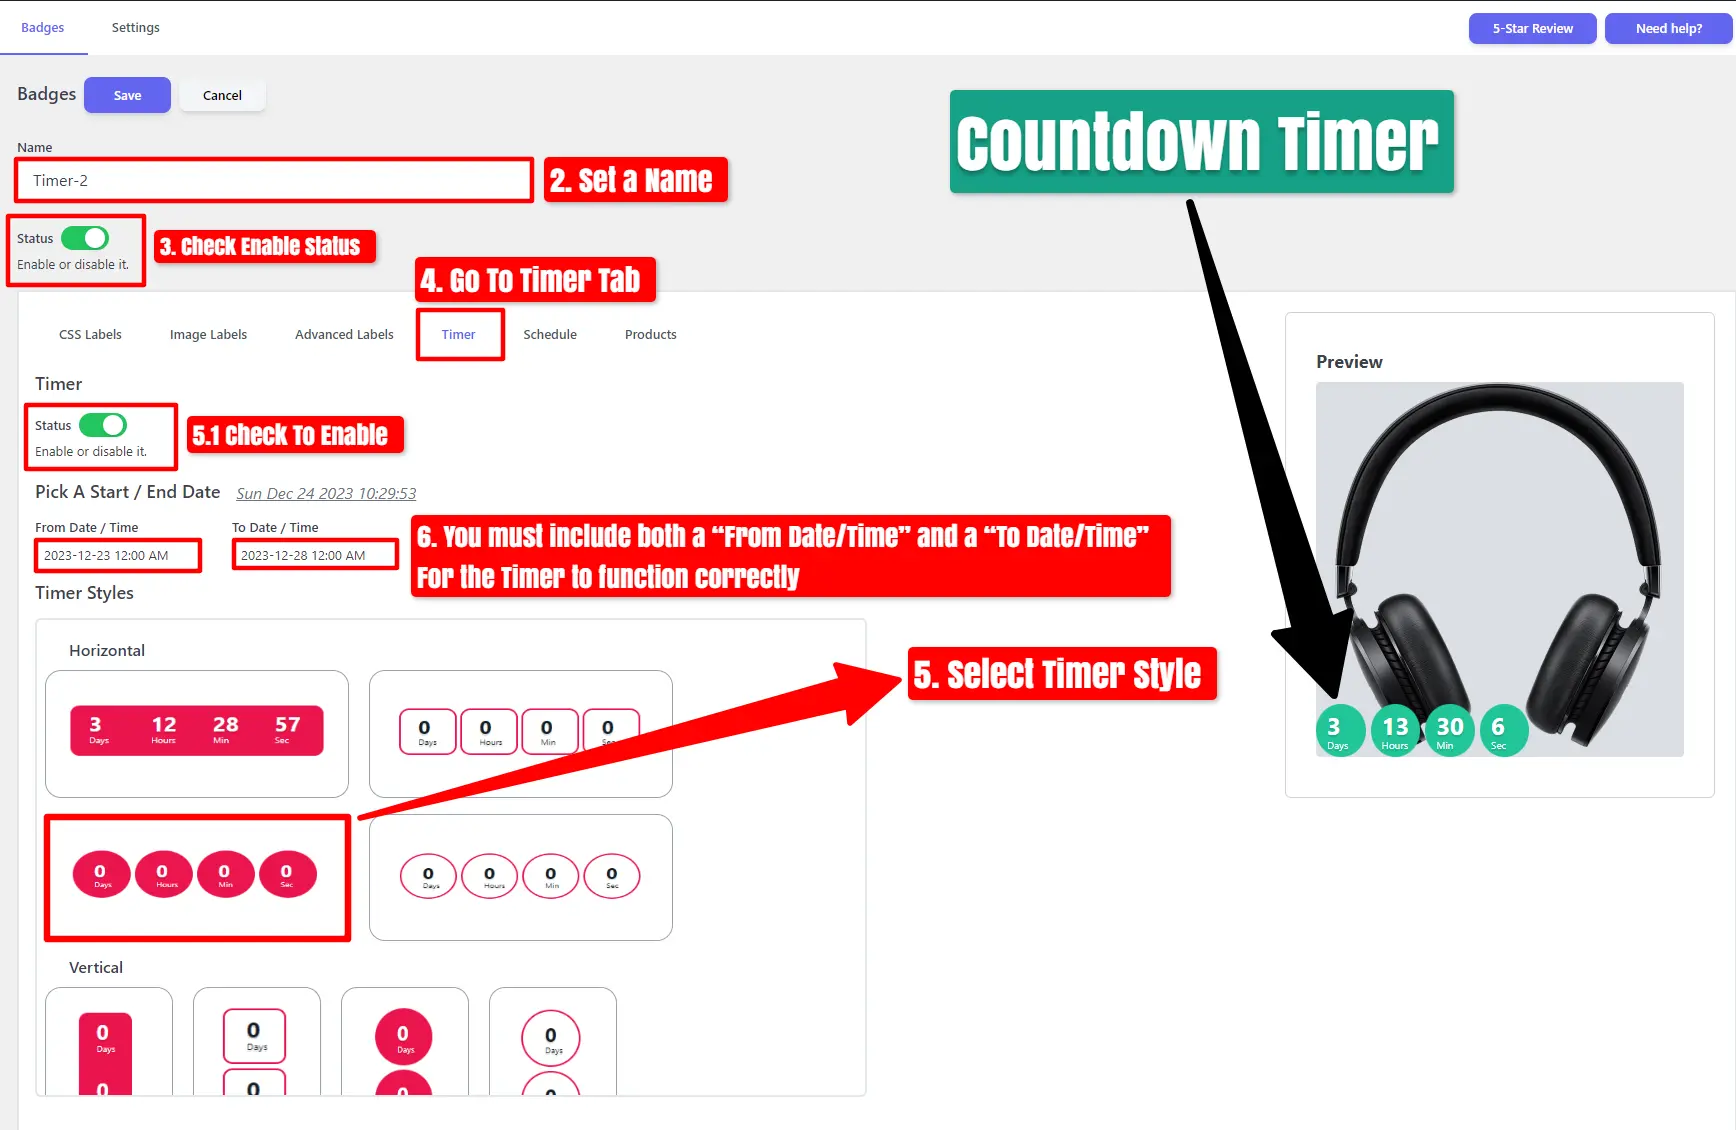 Adjustments to the Countdown Timer